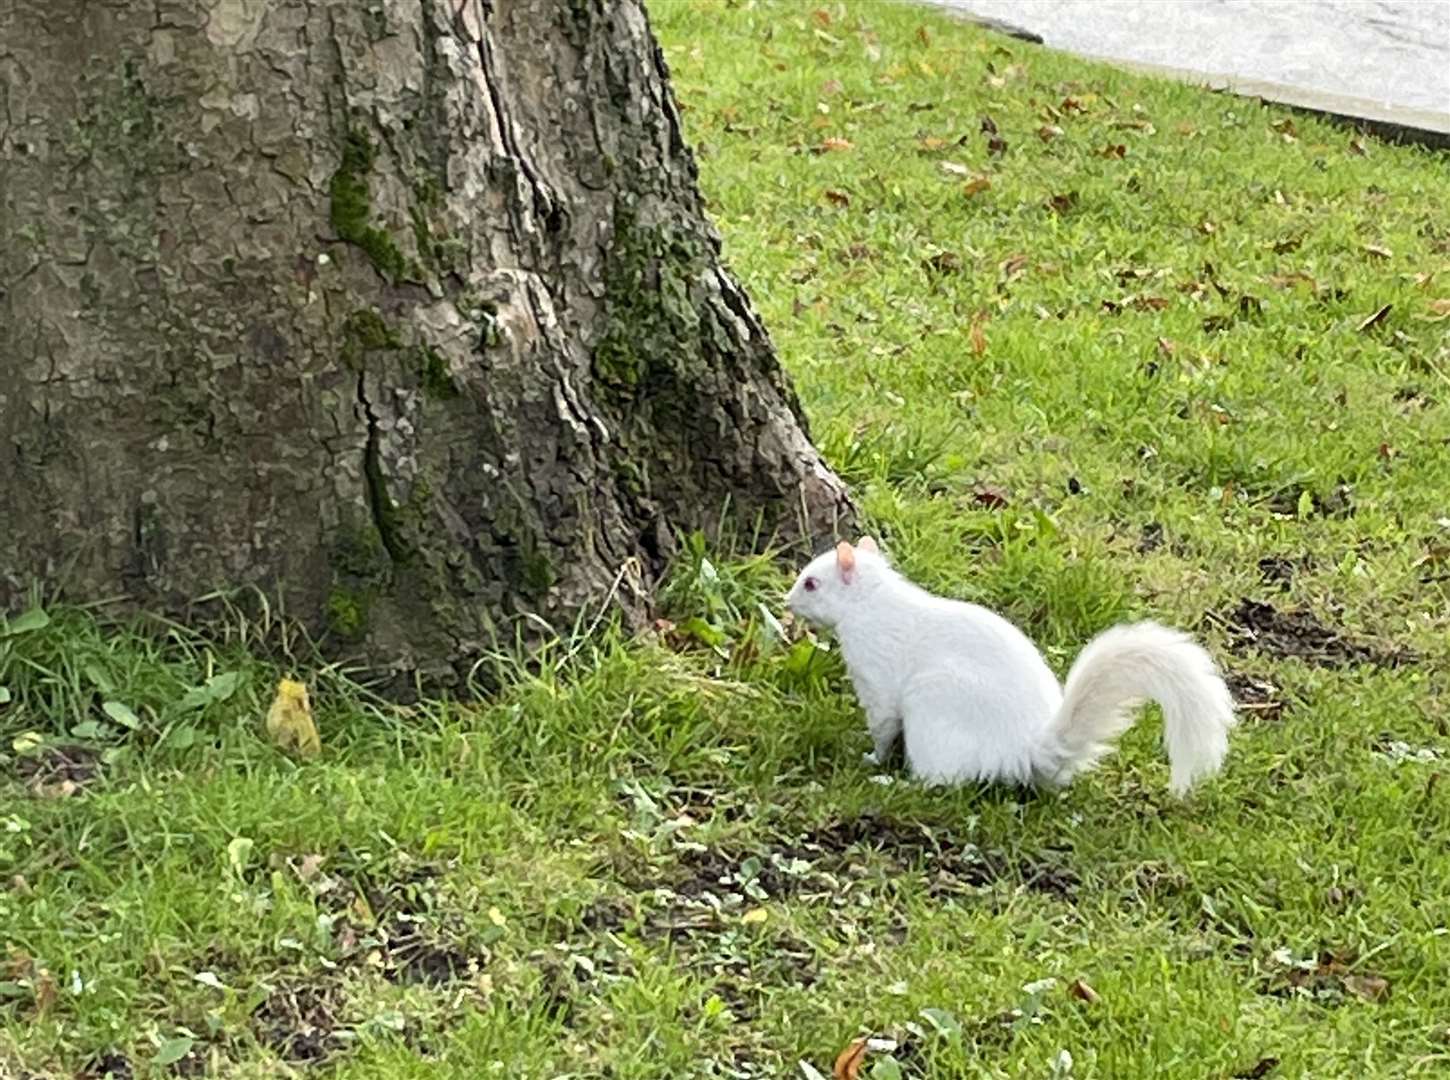 Albino squirrels have been spotted in Chatham cemetery grounds on numerous occasions now. Picture: Lewis Keemar